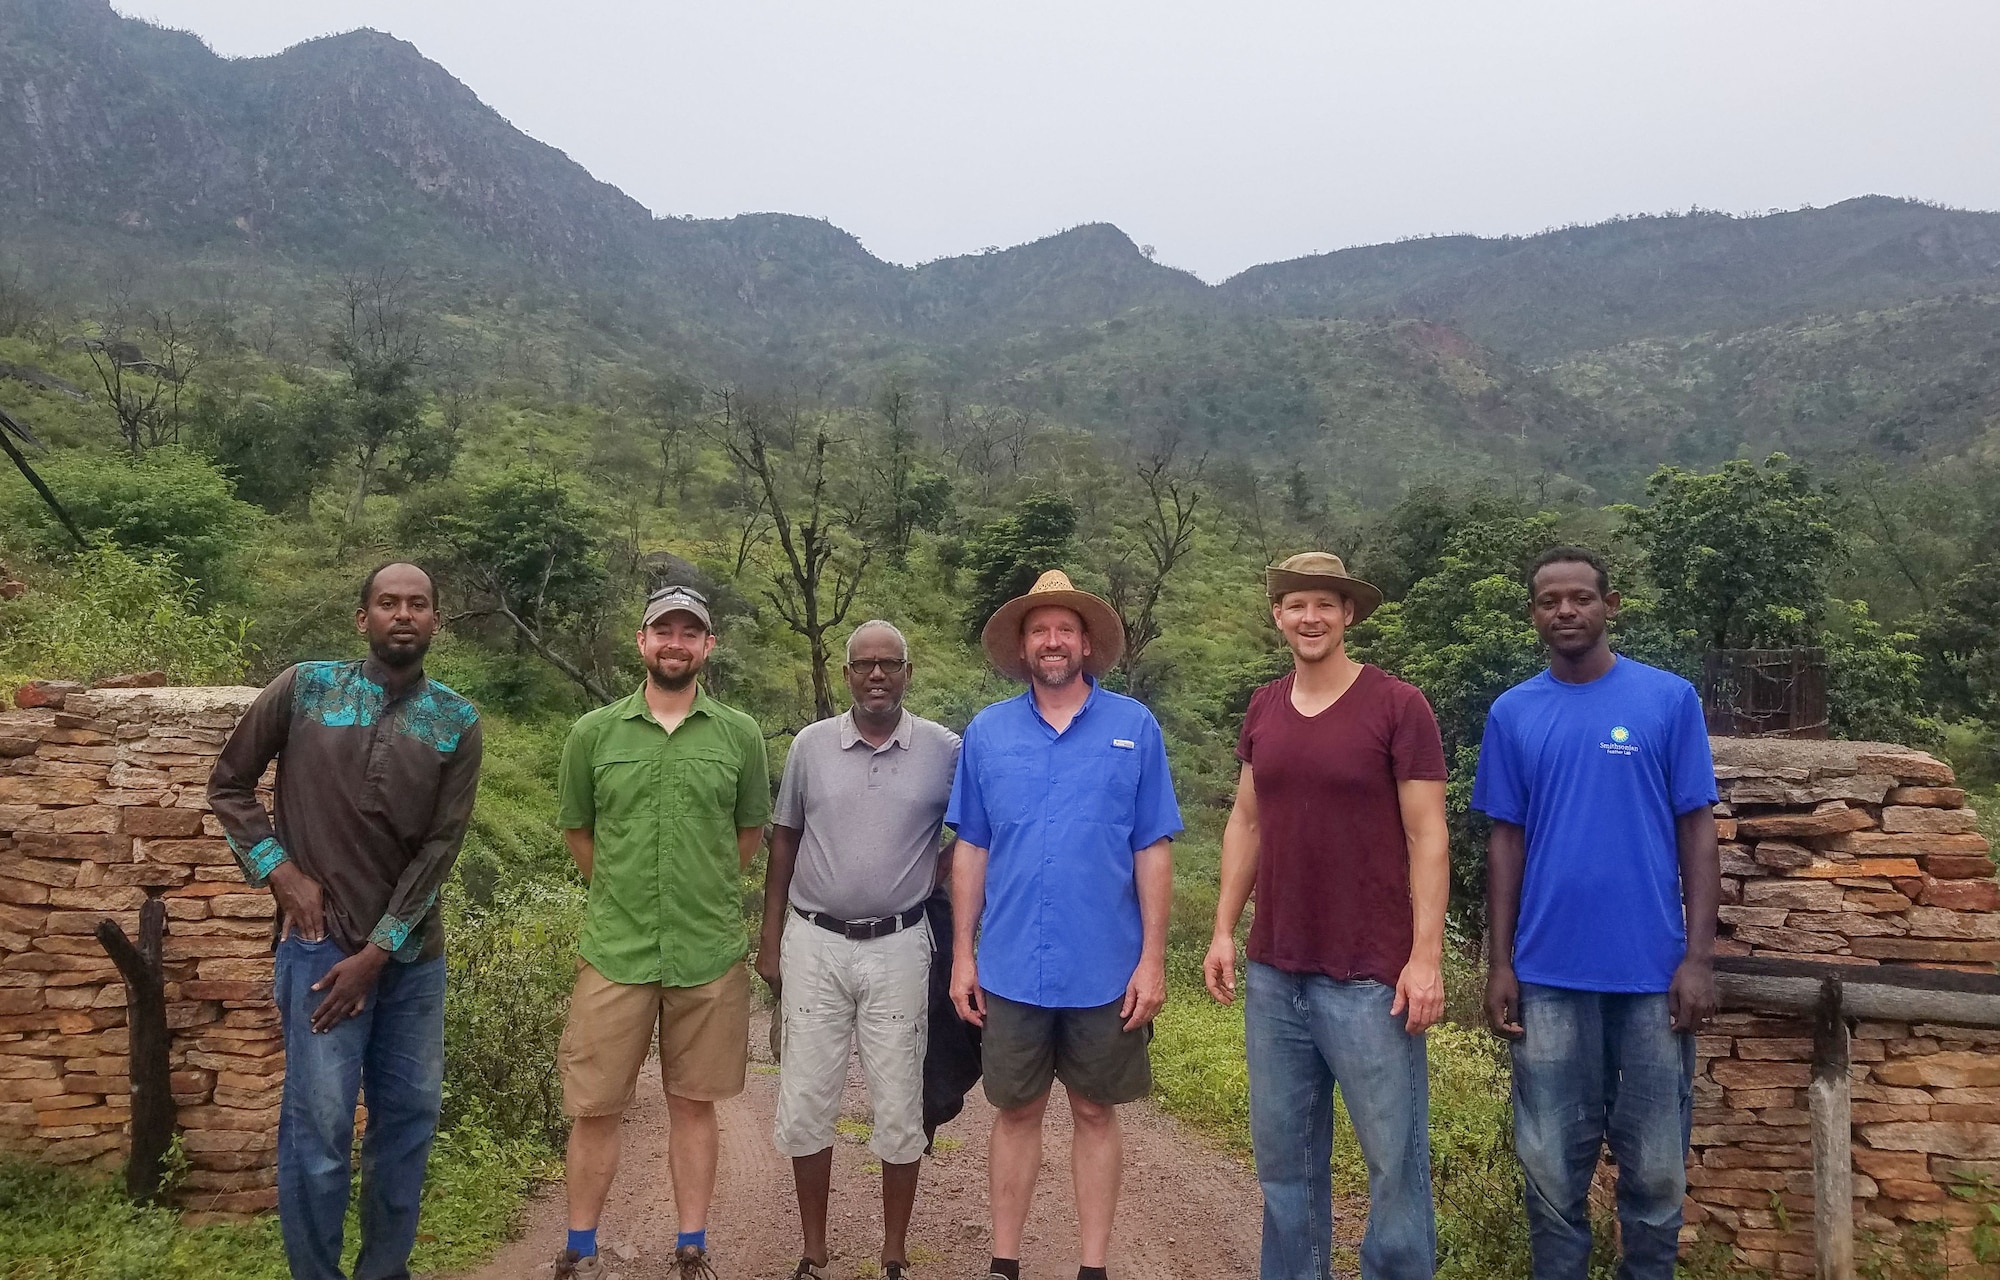 Group photo of expedition team and cadre ofDjiboutian nationals. Pictured from left to right - Djama from the Ministry of the Environment, James Whatton, Houssein Rayaleh from Djibouti Nature, Christopher Milensky, 1st Lt. Will Boss, and their driver Mohammad.